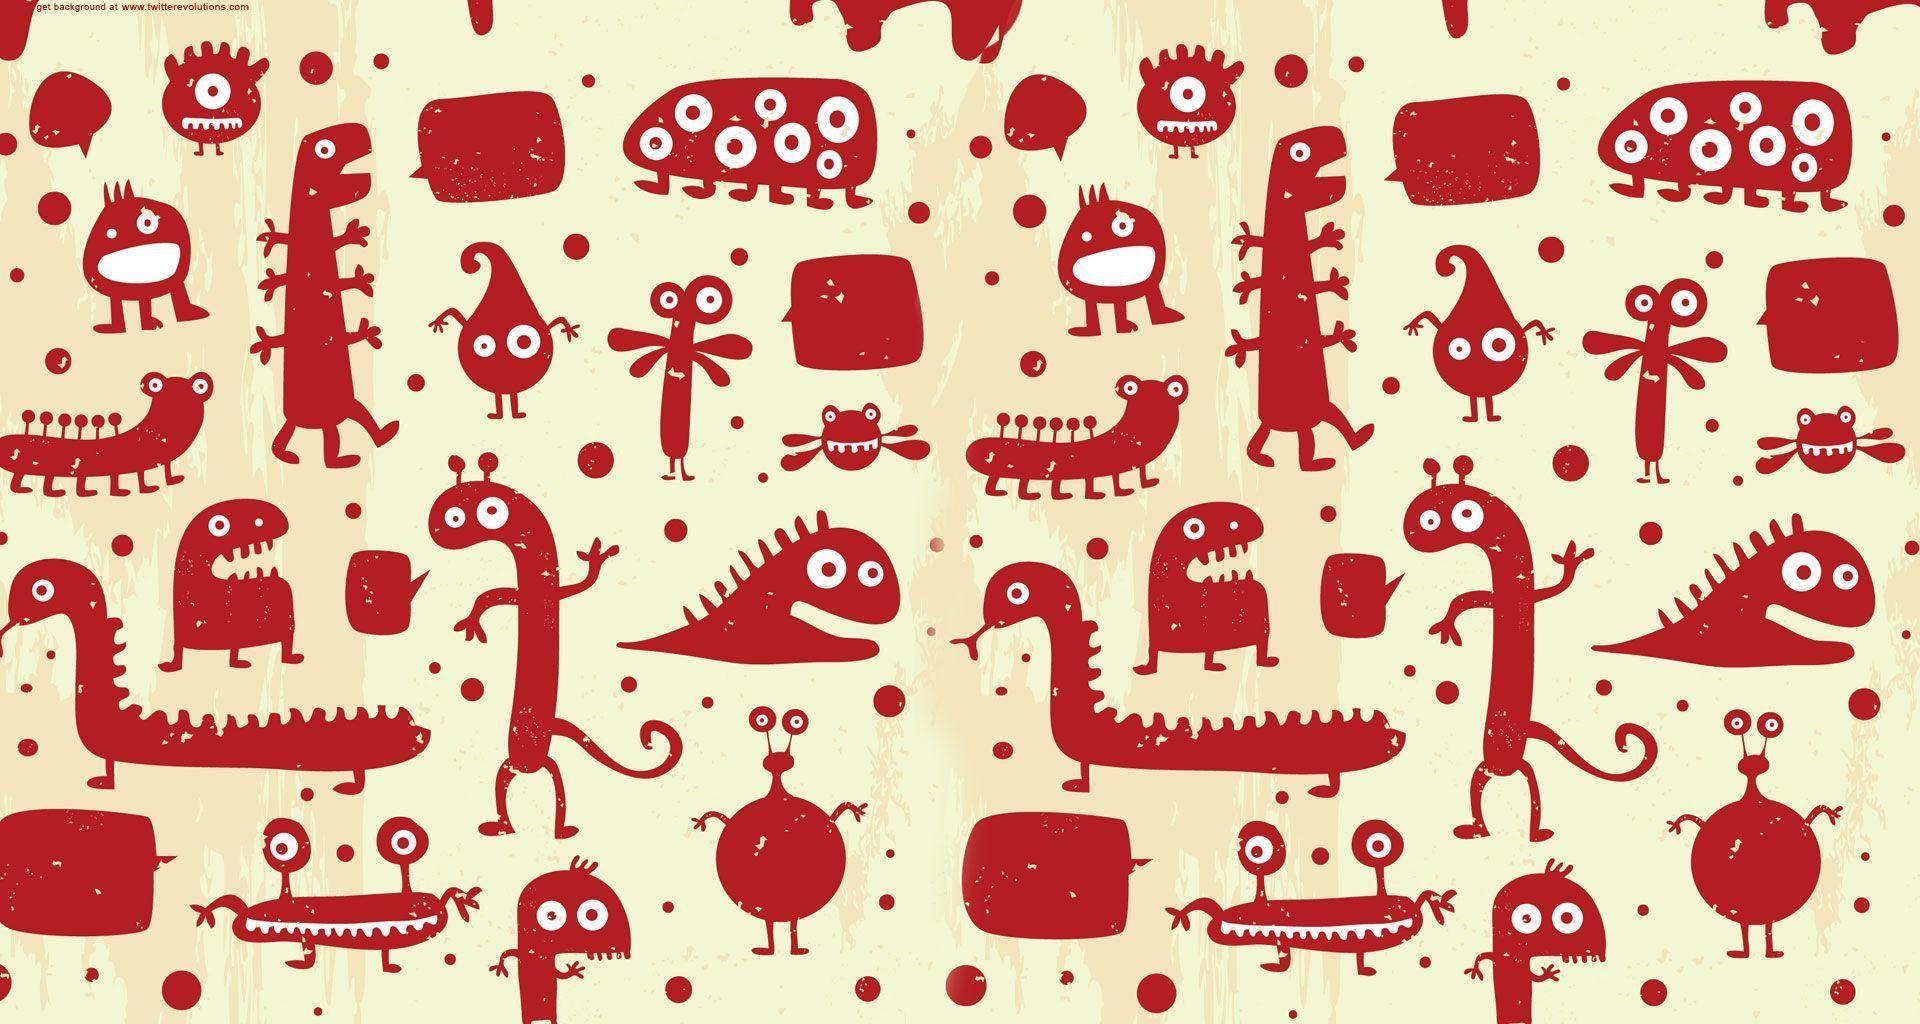 Cute monsters Twitter background. Twitter background